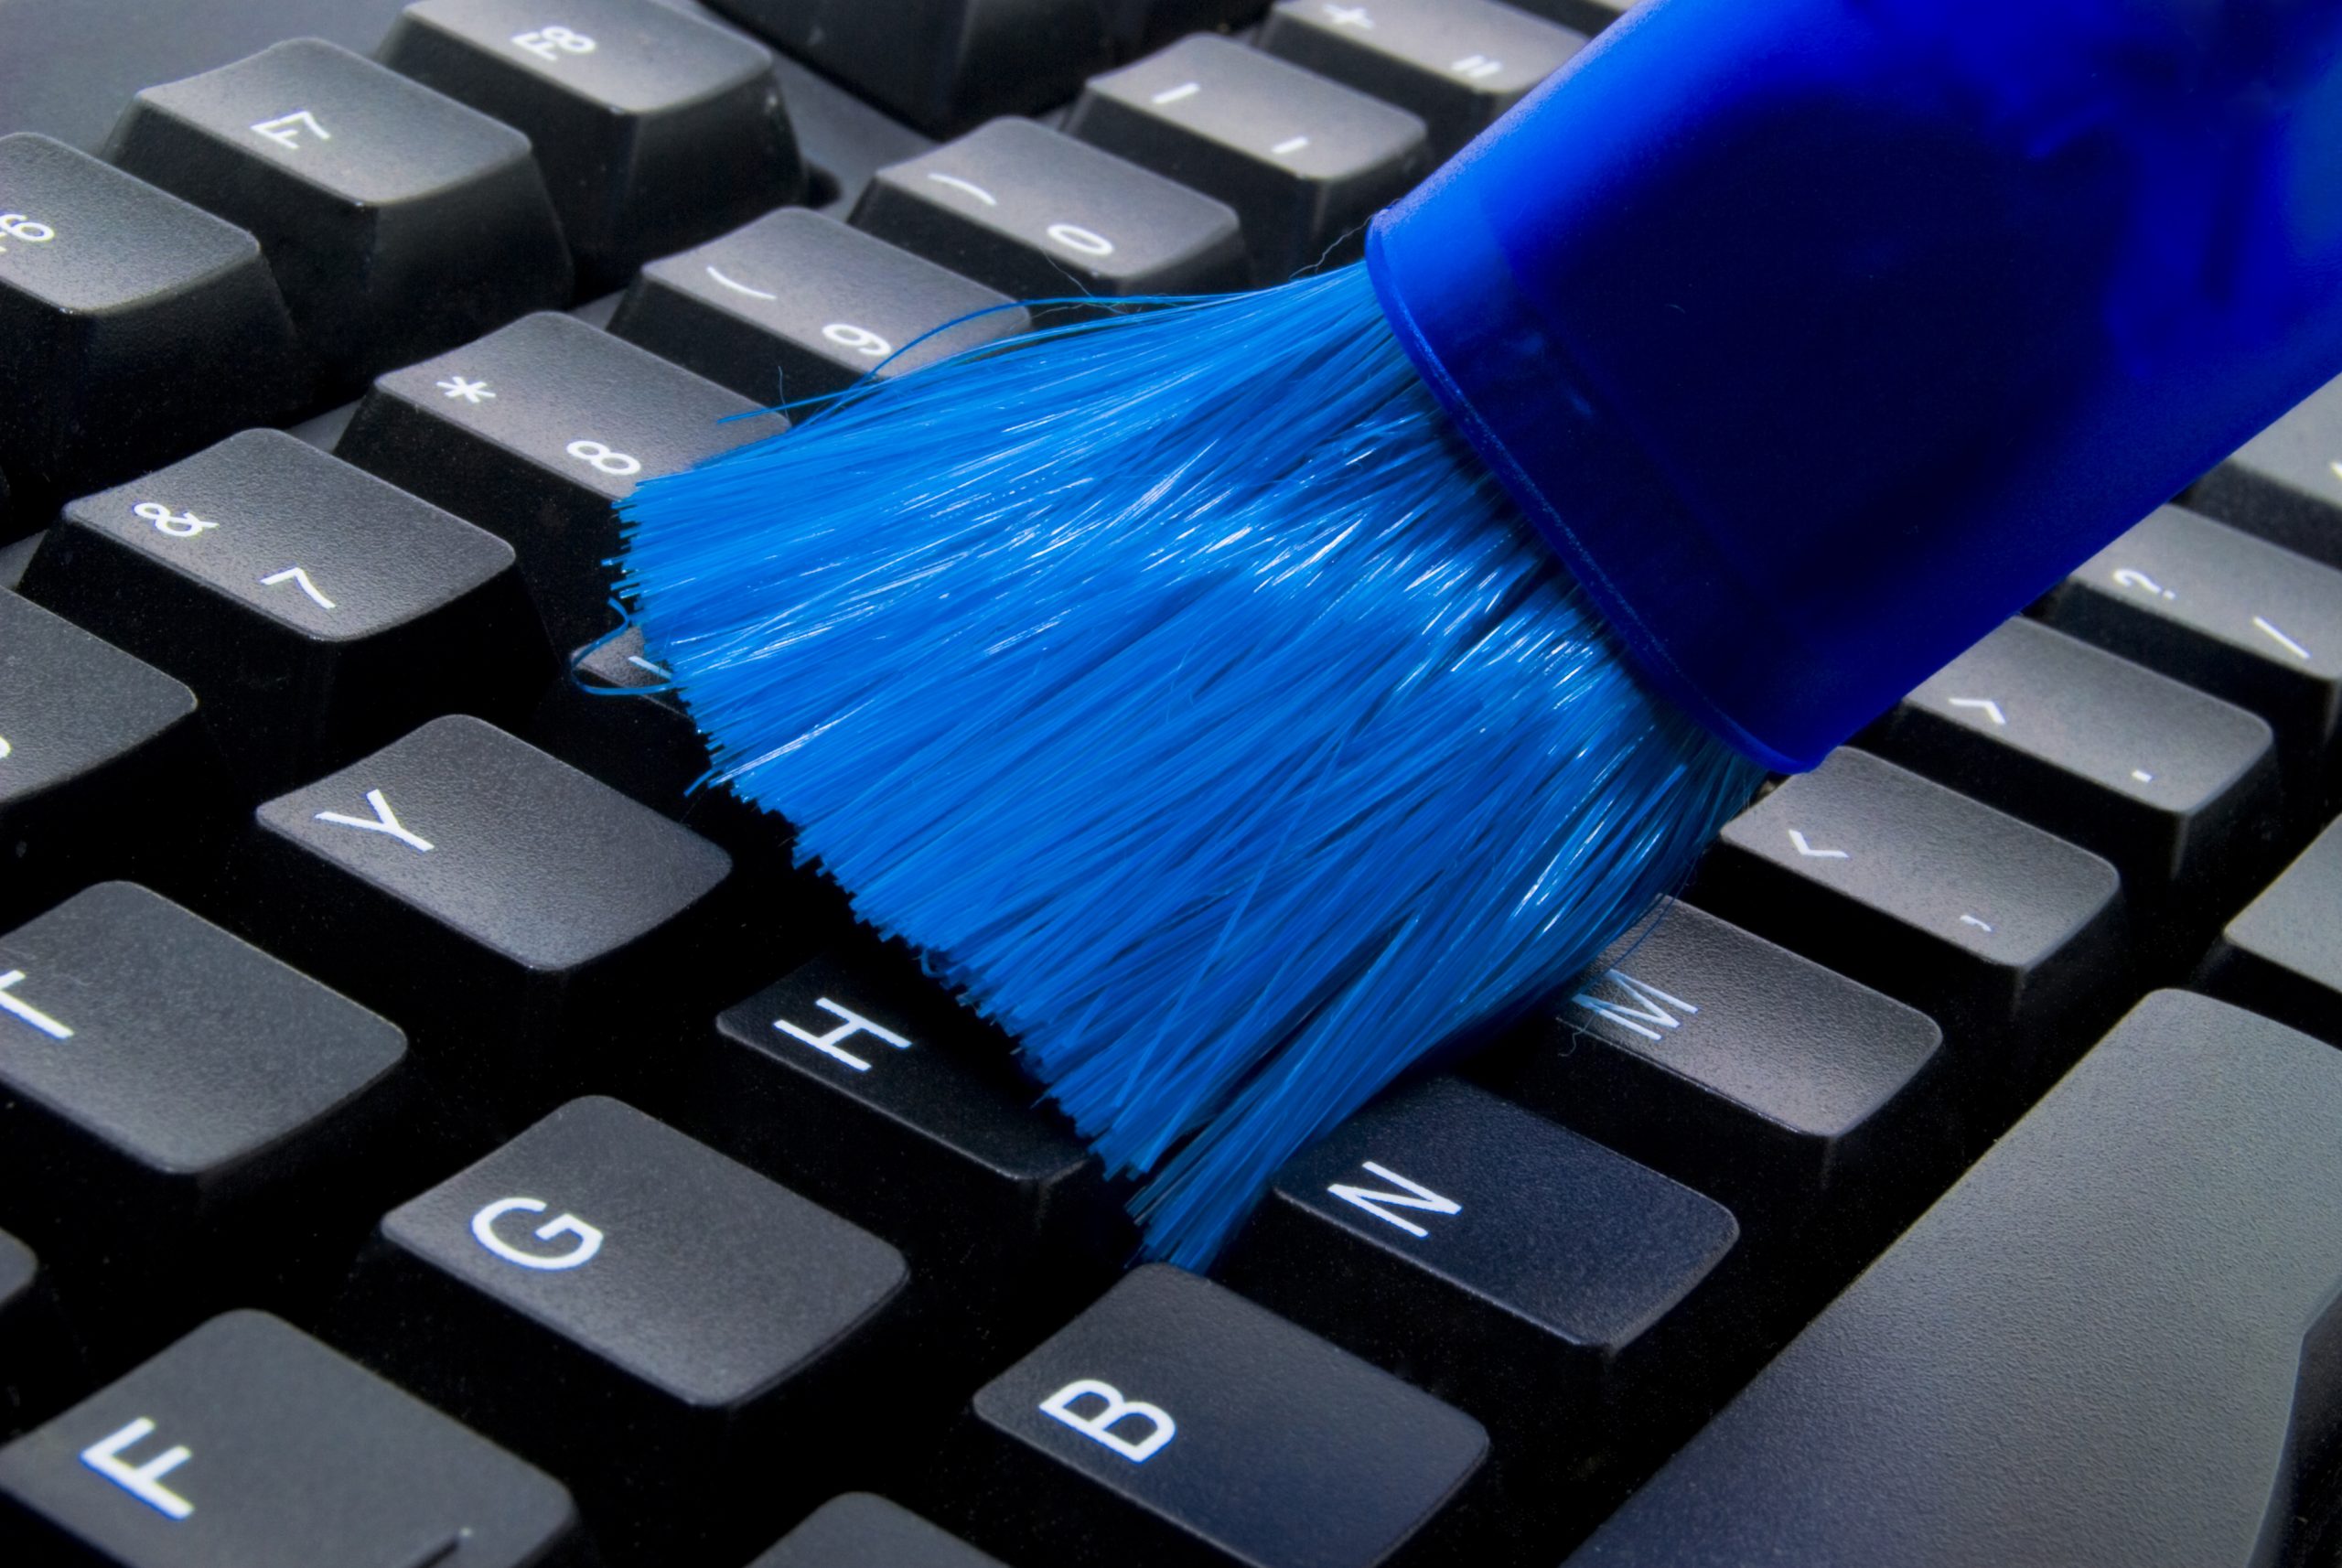 Keyboard,Cleaner,In,Blue,Color,Cleaning,A,Keyboard,In,Black